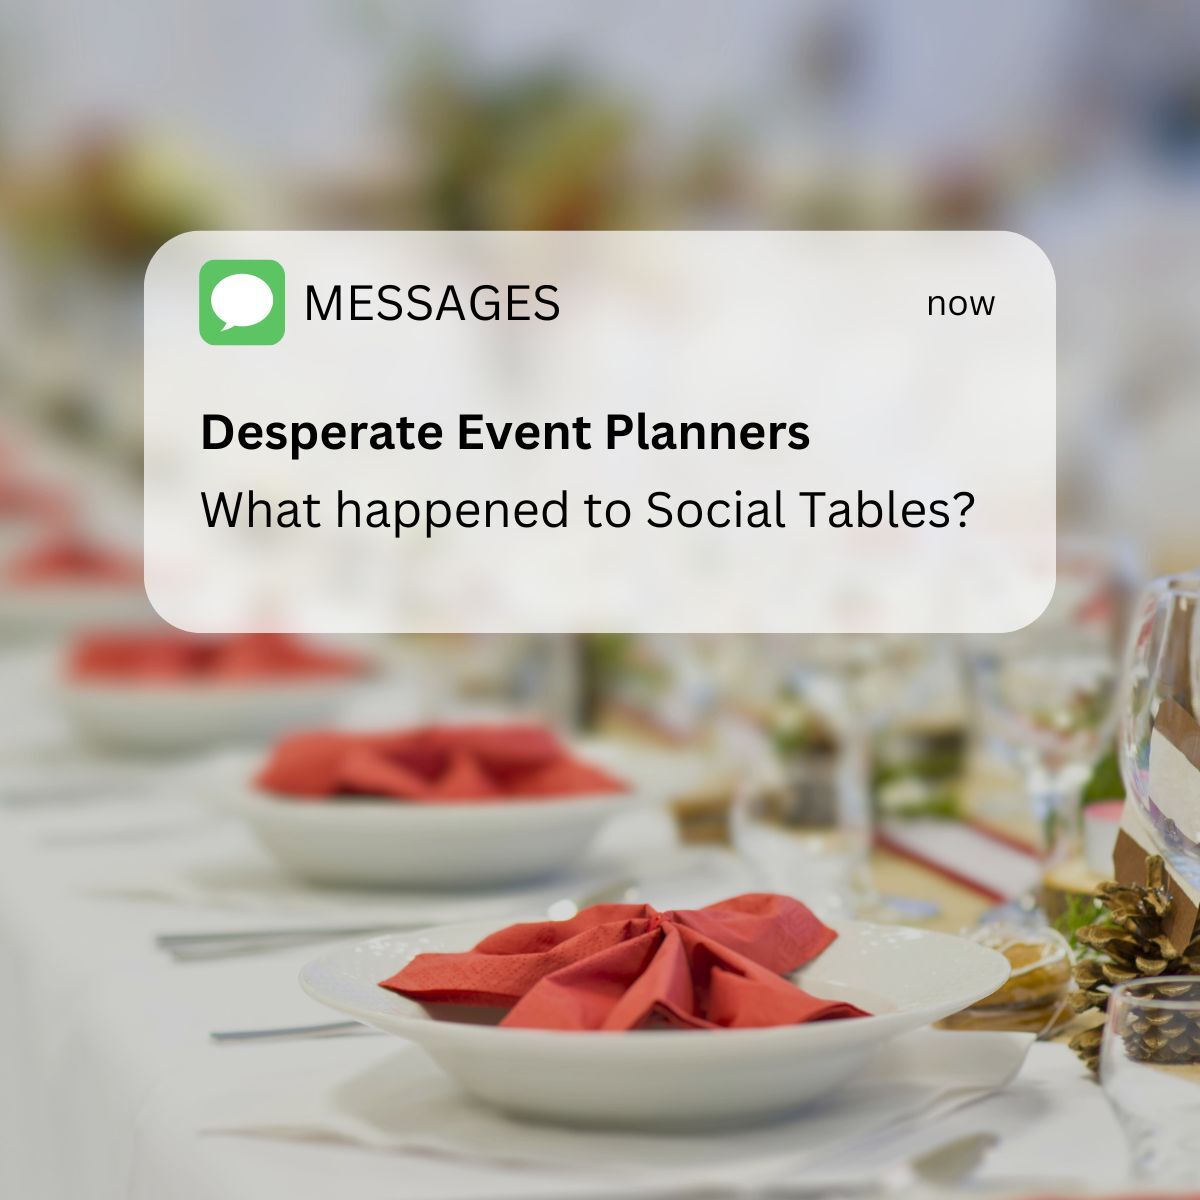 Why are so many planners looking for Social Tables alternatives?